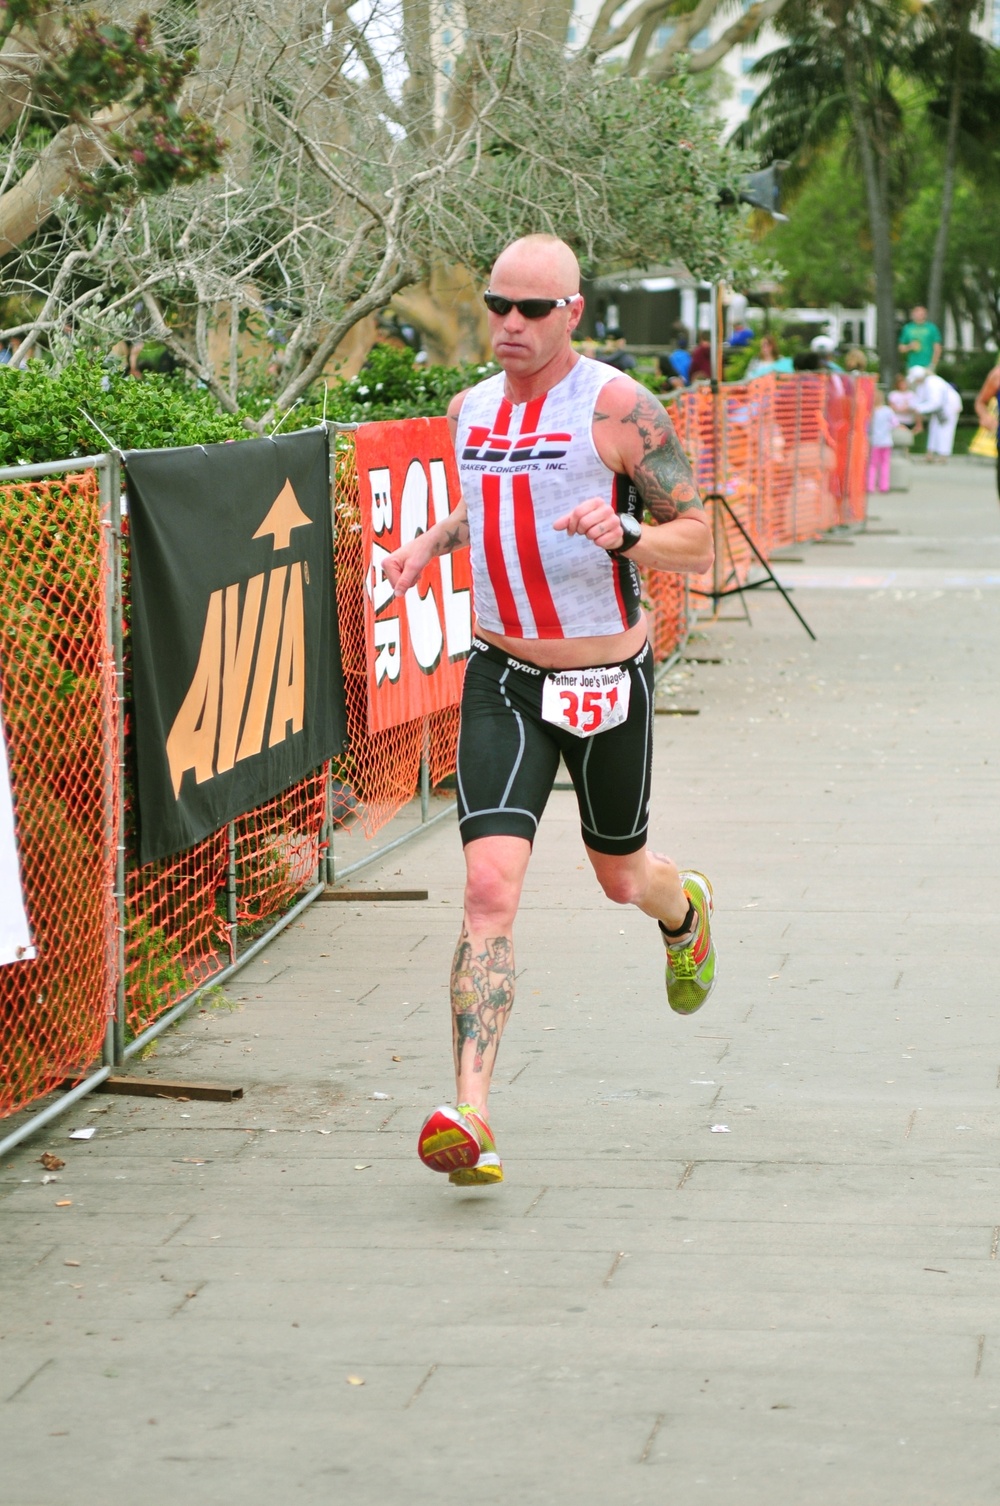 Paddle, pedal, breathe: Marine continues to compete in triathlons